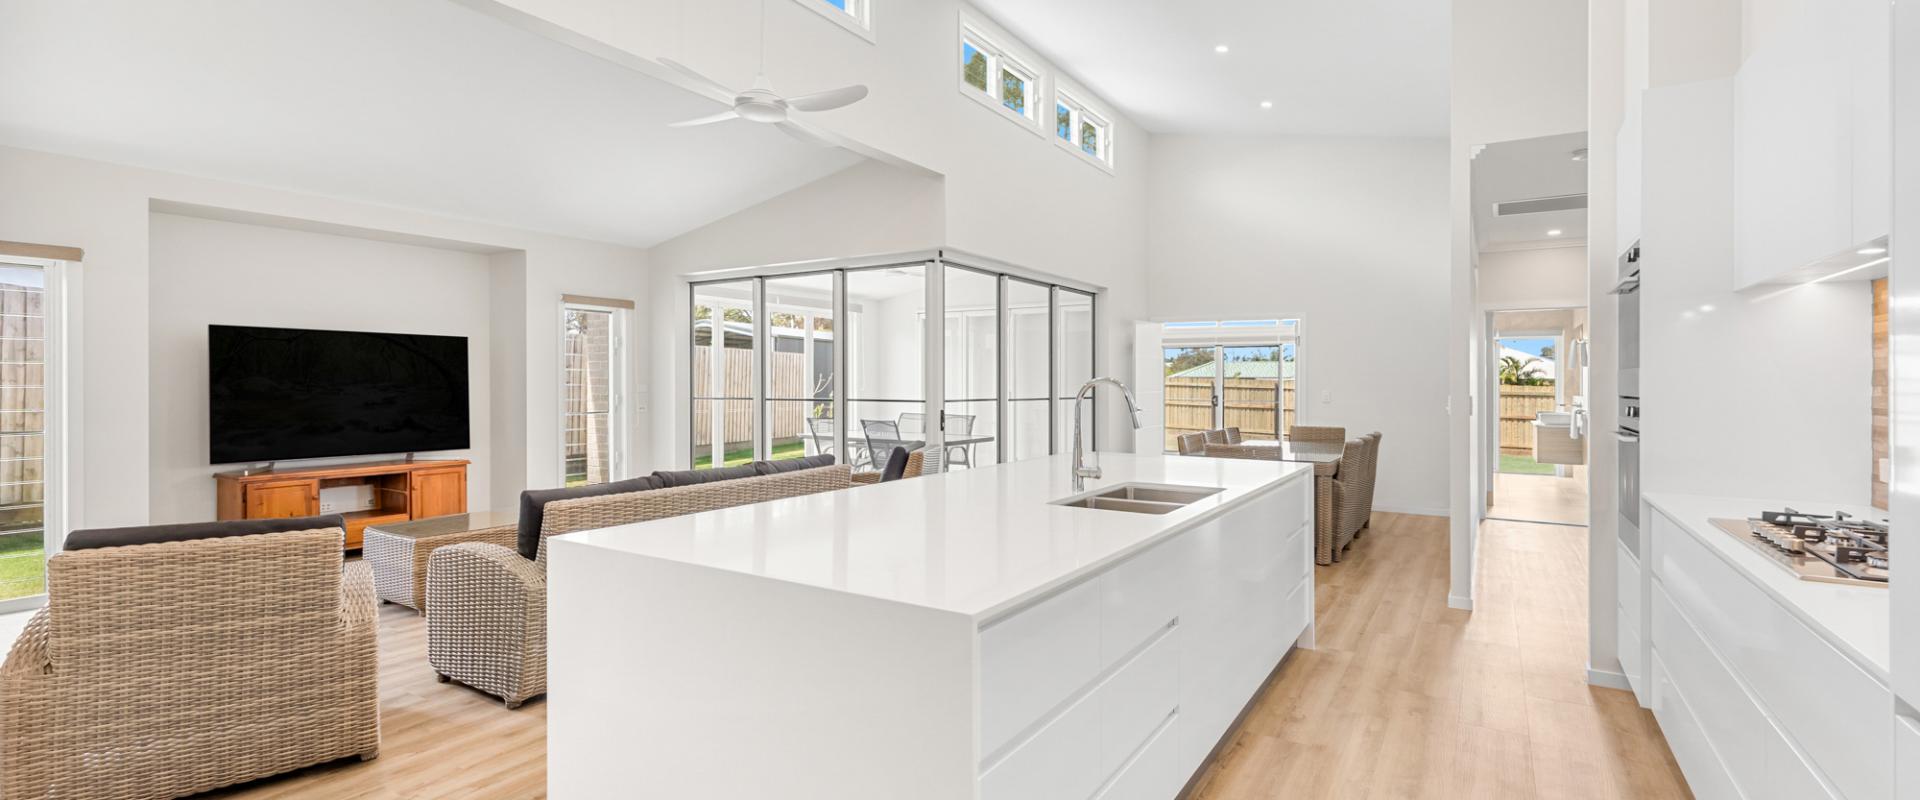 UNIQUE, QUALITY, DUAL LIVING SPACIOUS FAMILY HOME, DESIGNED FOR ALL AGES & ABILITIES, 4.3 METRE CENTRAL RAKED CEILING, 300 METRES TO THE BEACH & WATER